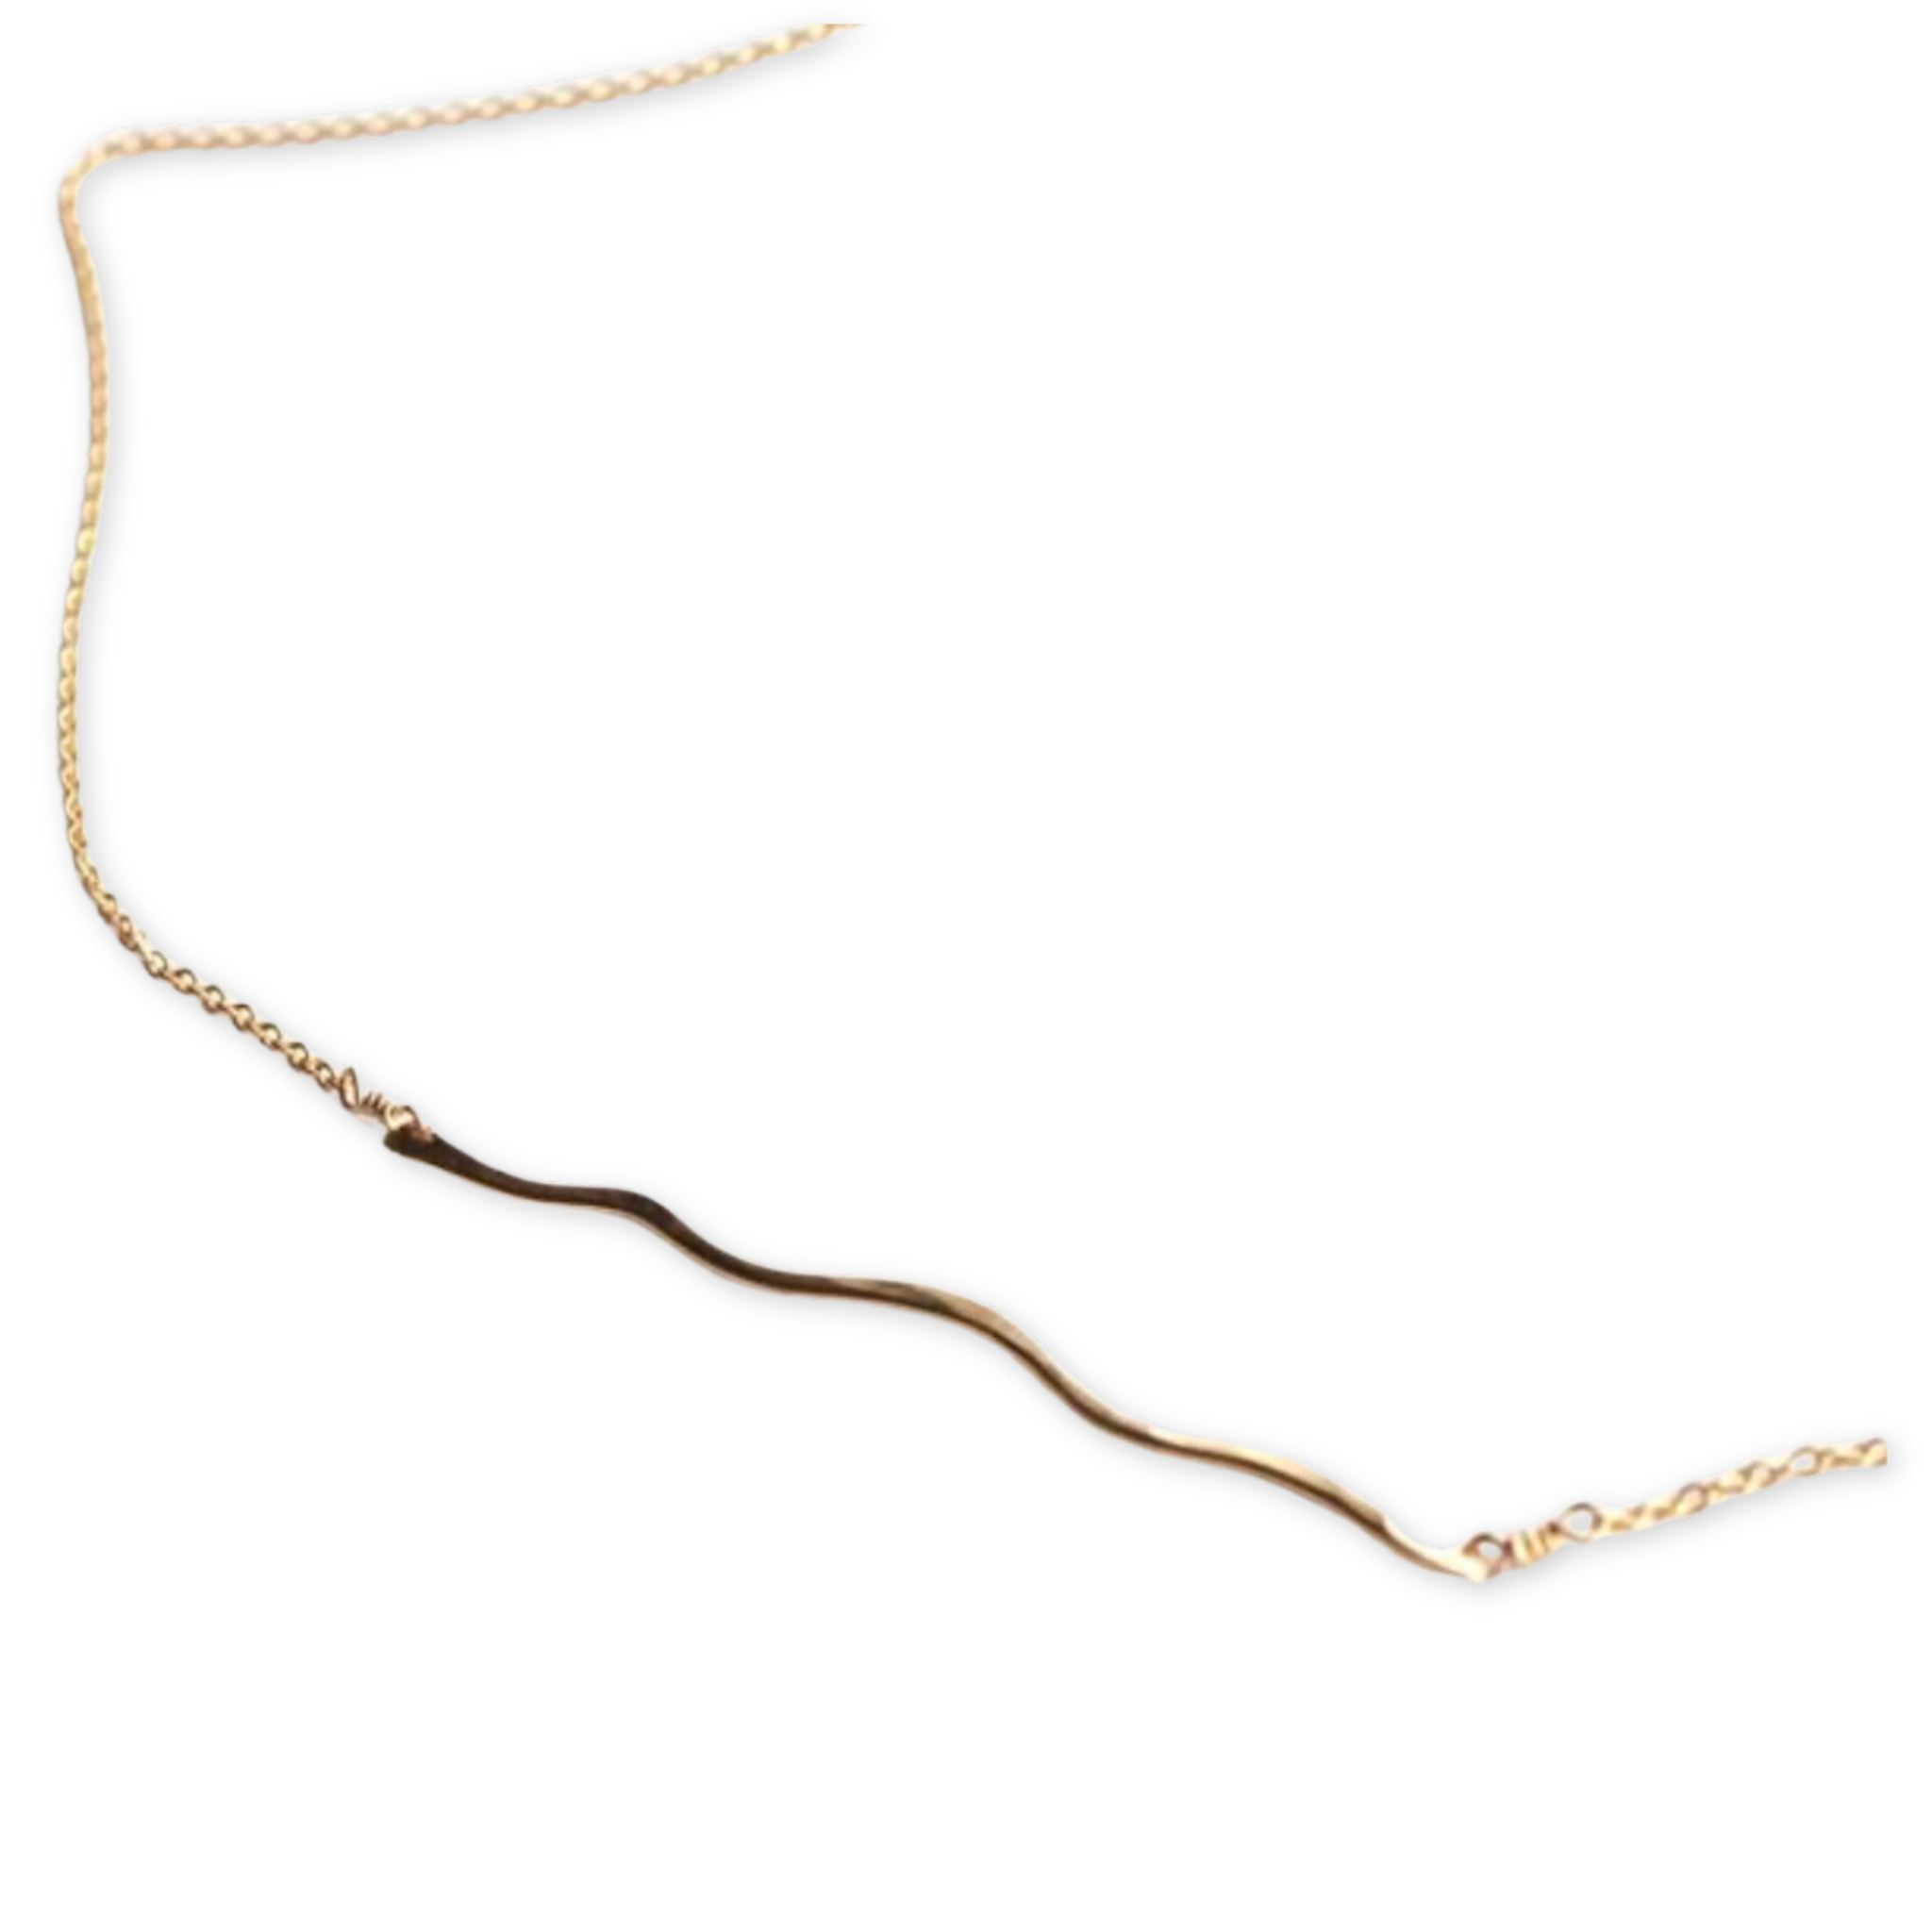 necklace with a chain and wavy bar